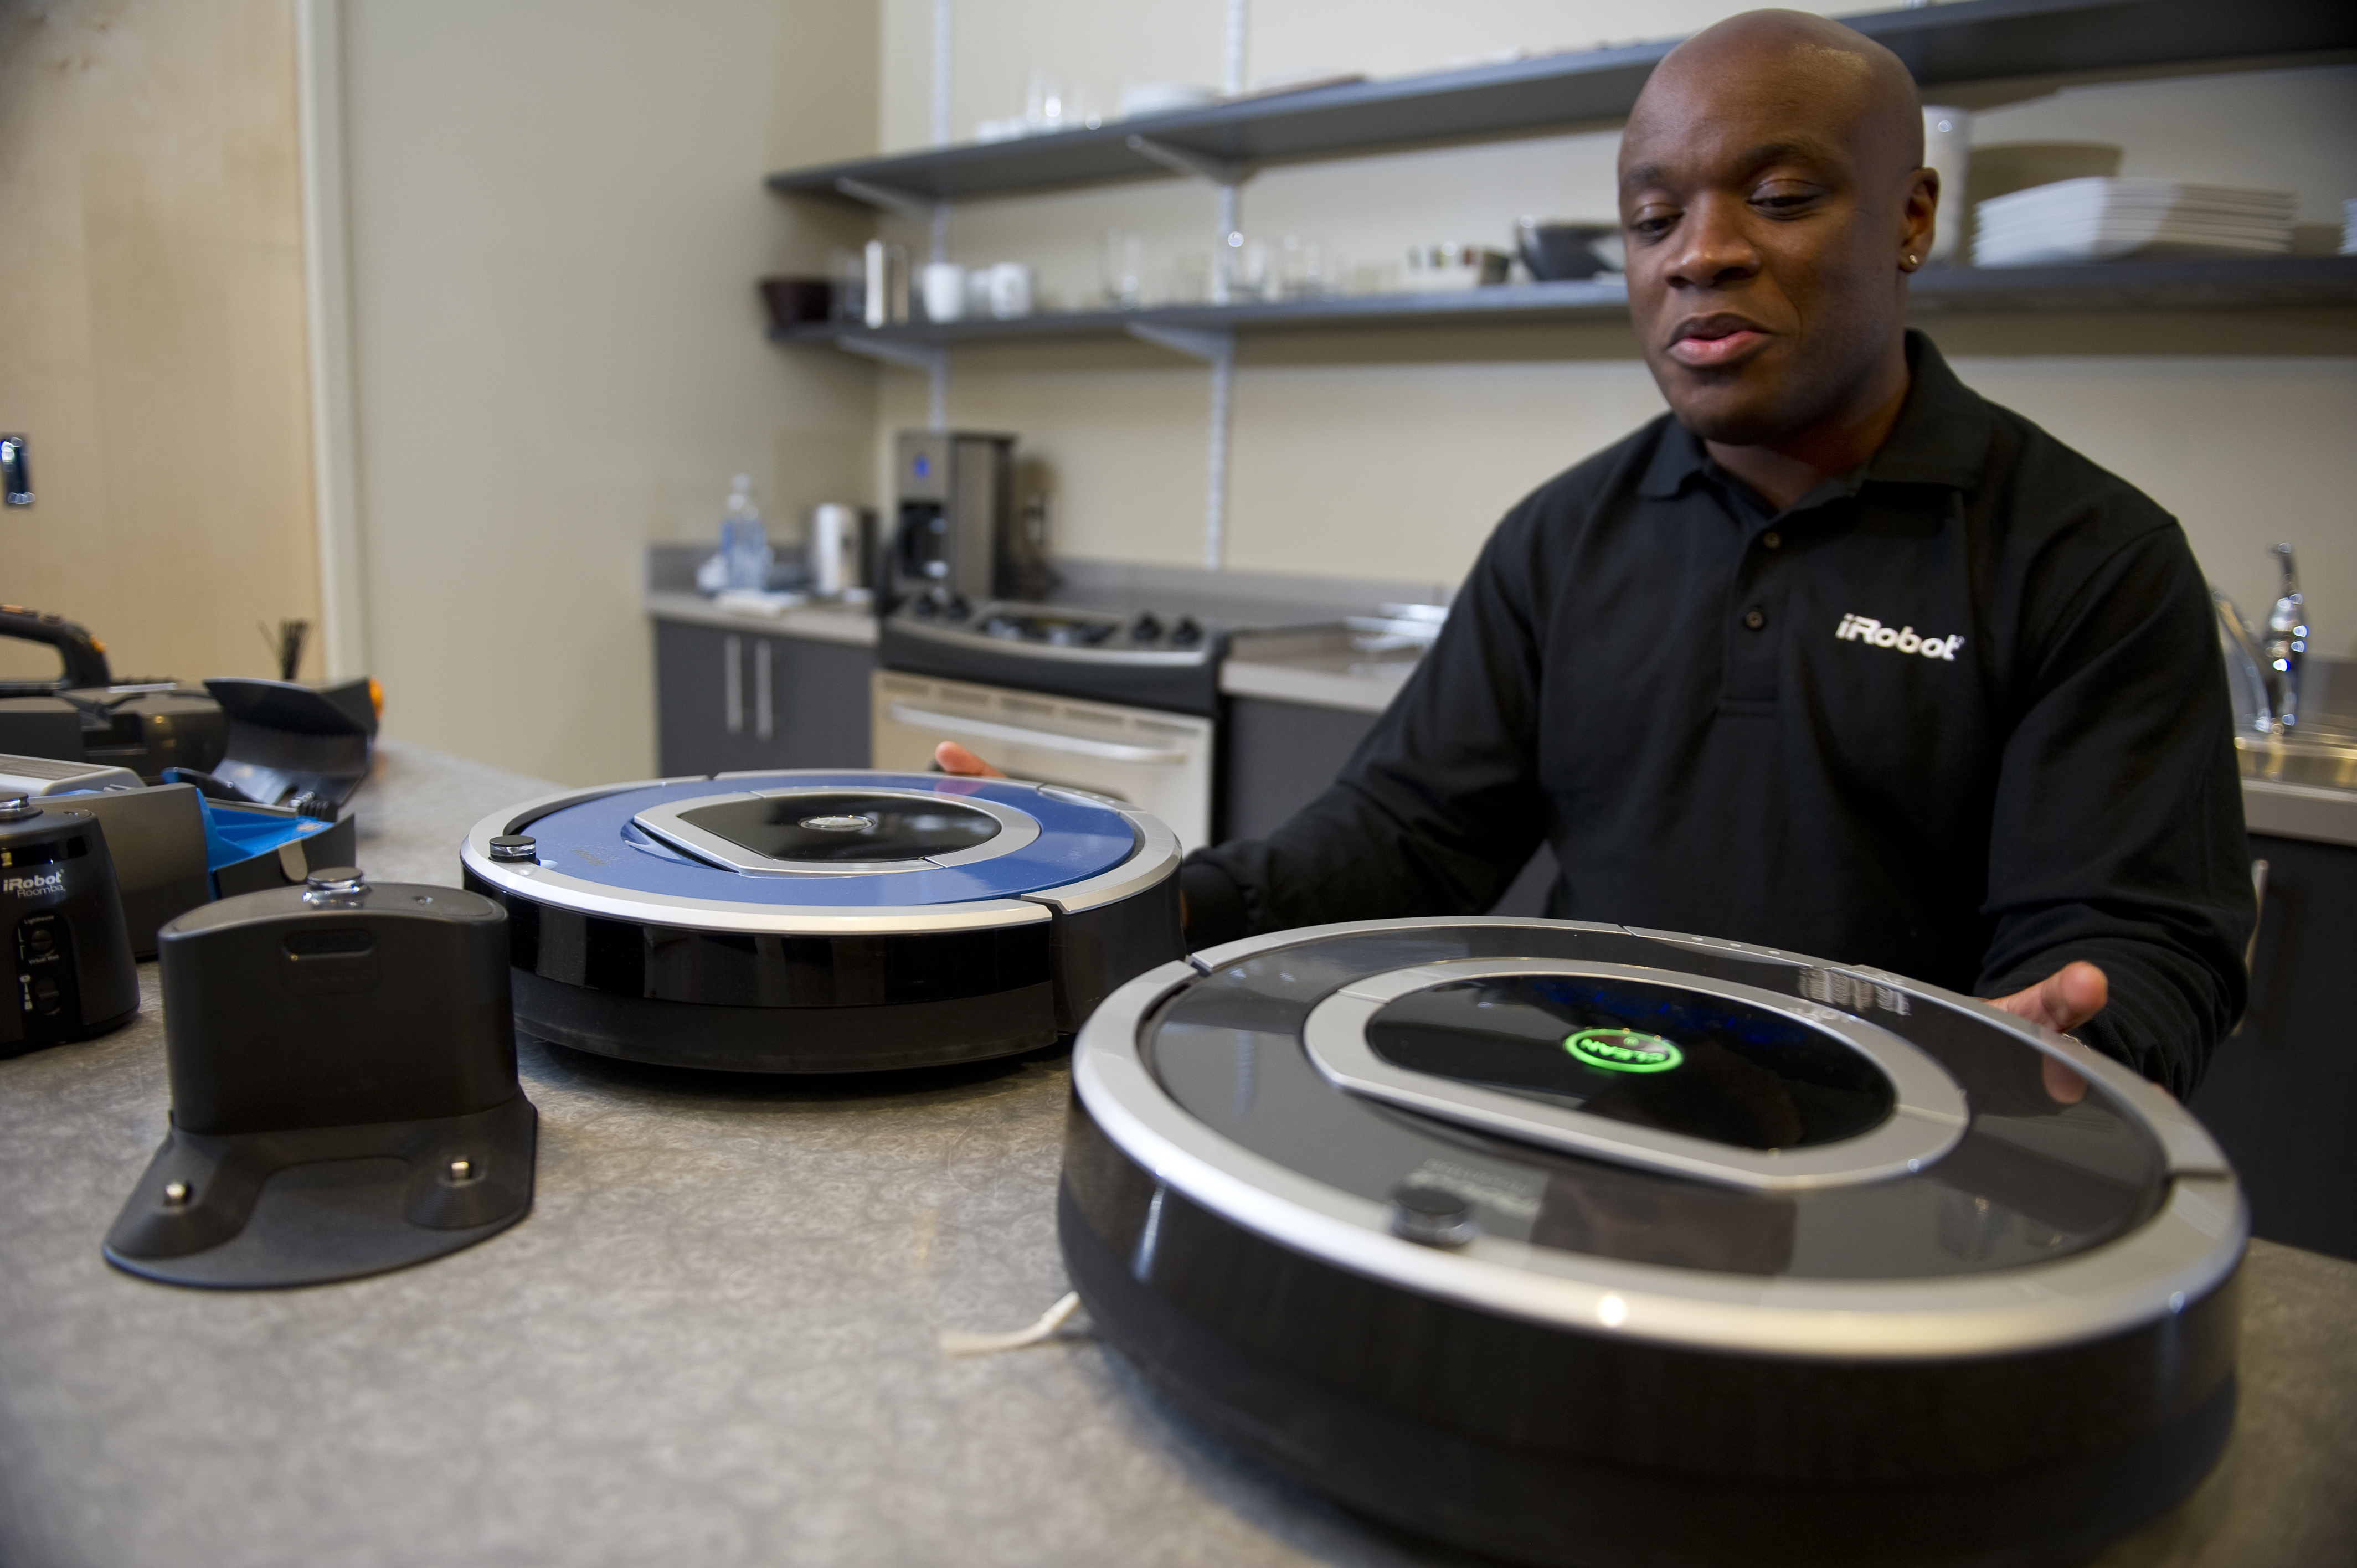 The features of the iRobot Roomba are demonstrated by an iRobot employee in a show room at the iRobot offices, on August 24, 2012 in Bedford, Massachusetts. (Christian Science Monitor&mdash;Christian Science Monitor/Getty)